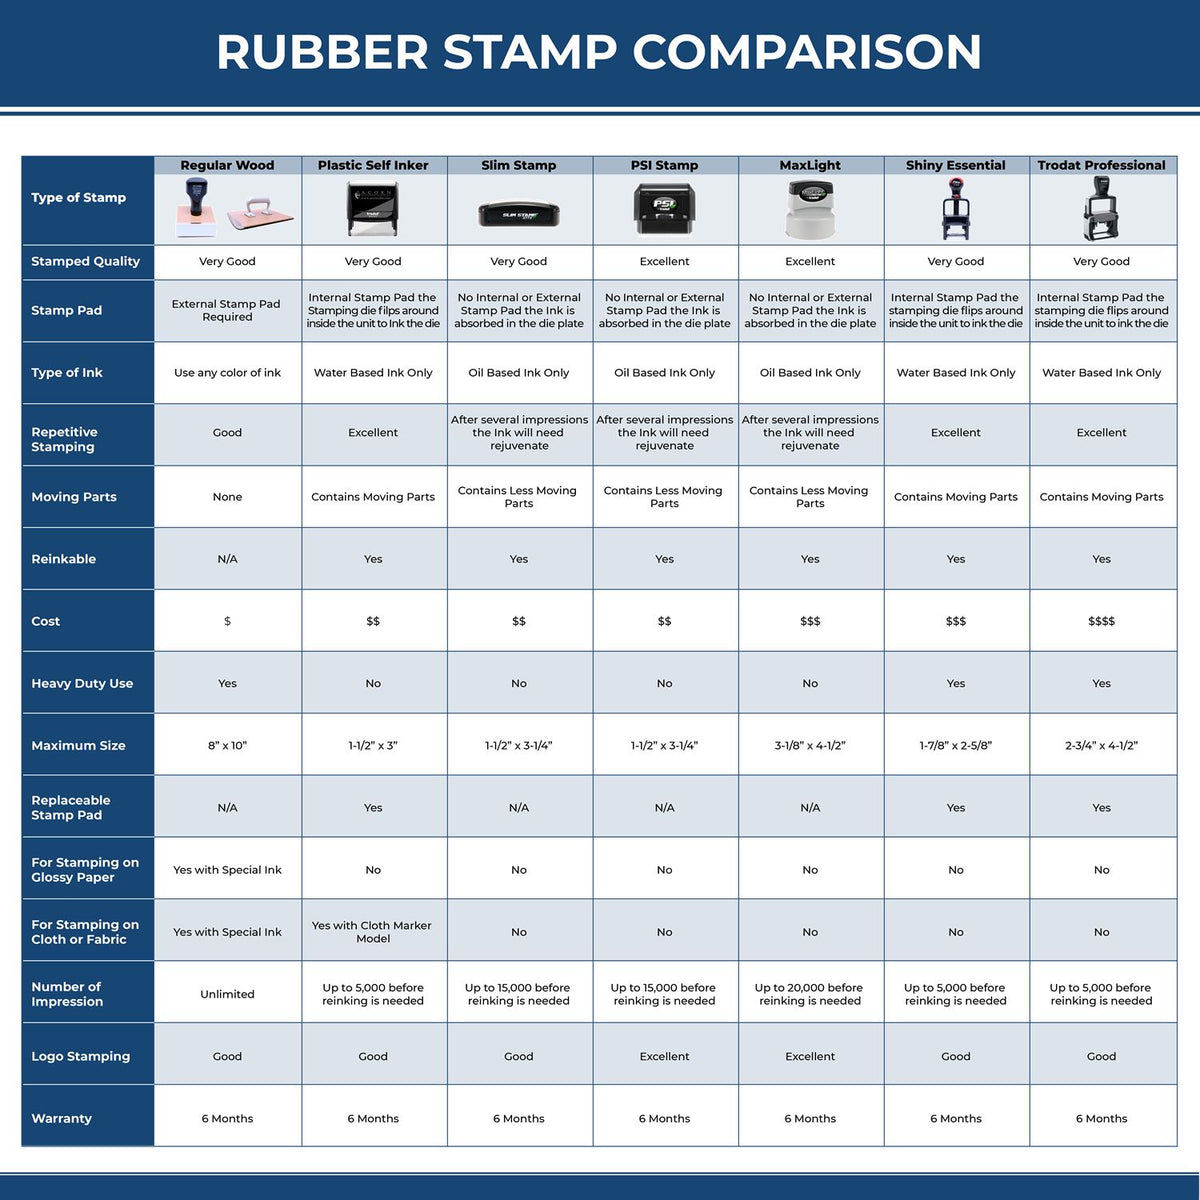 Large Show All Of Your Work Rubber Stamp 4699R Rubber Stamp Comparison